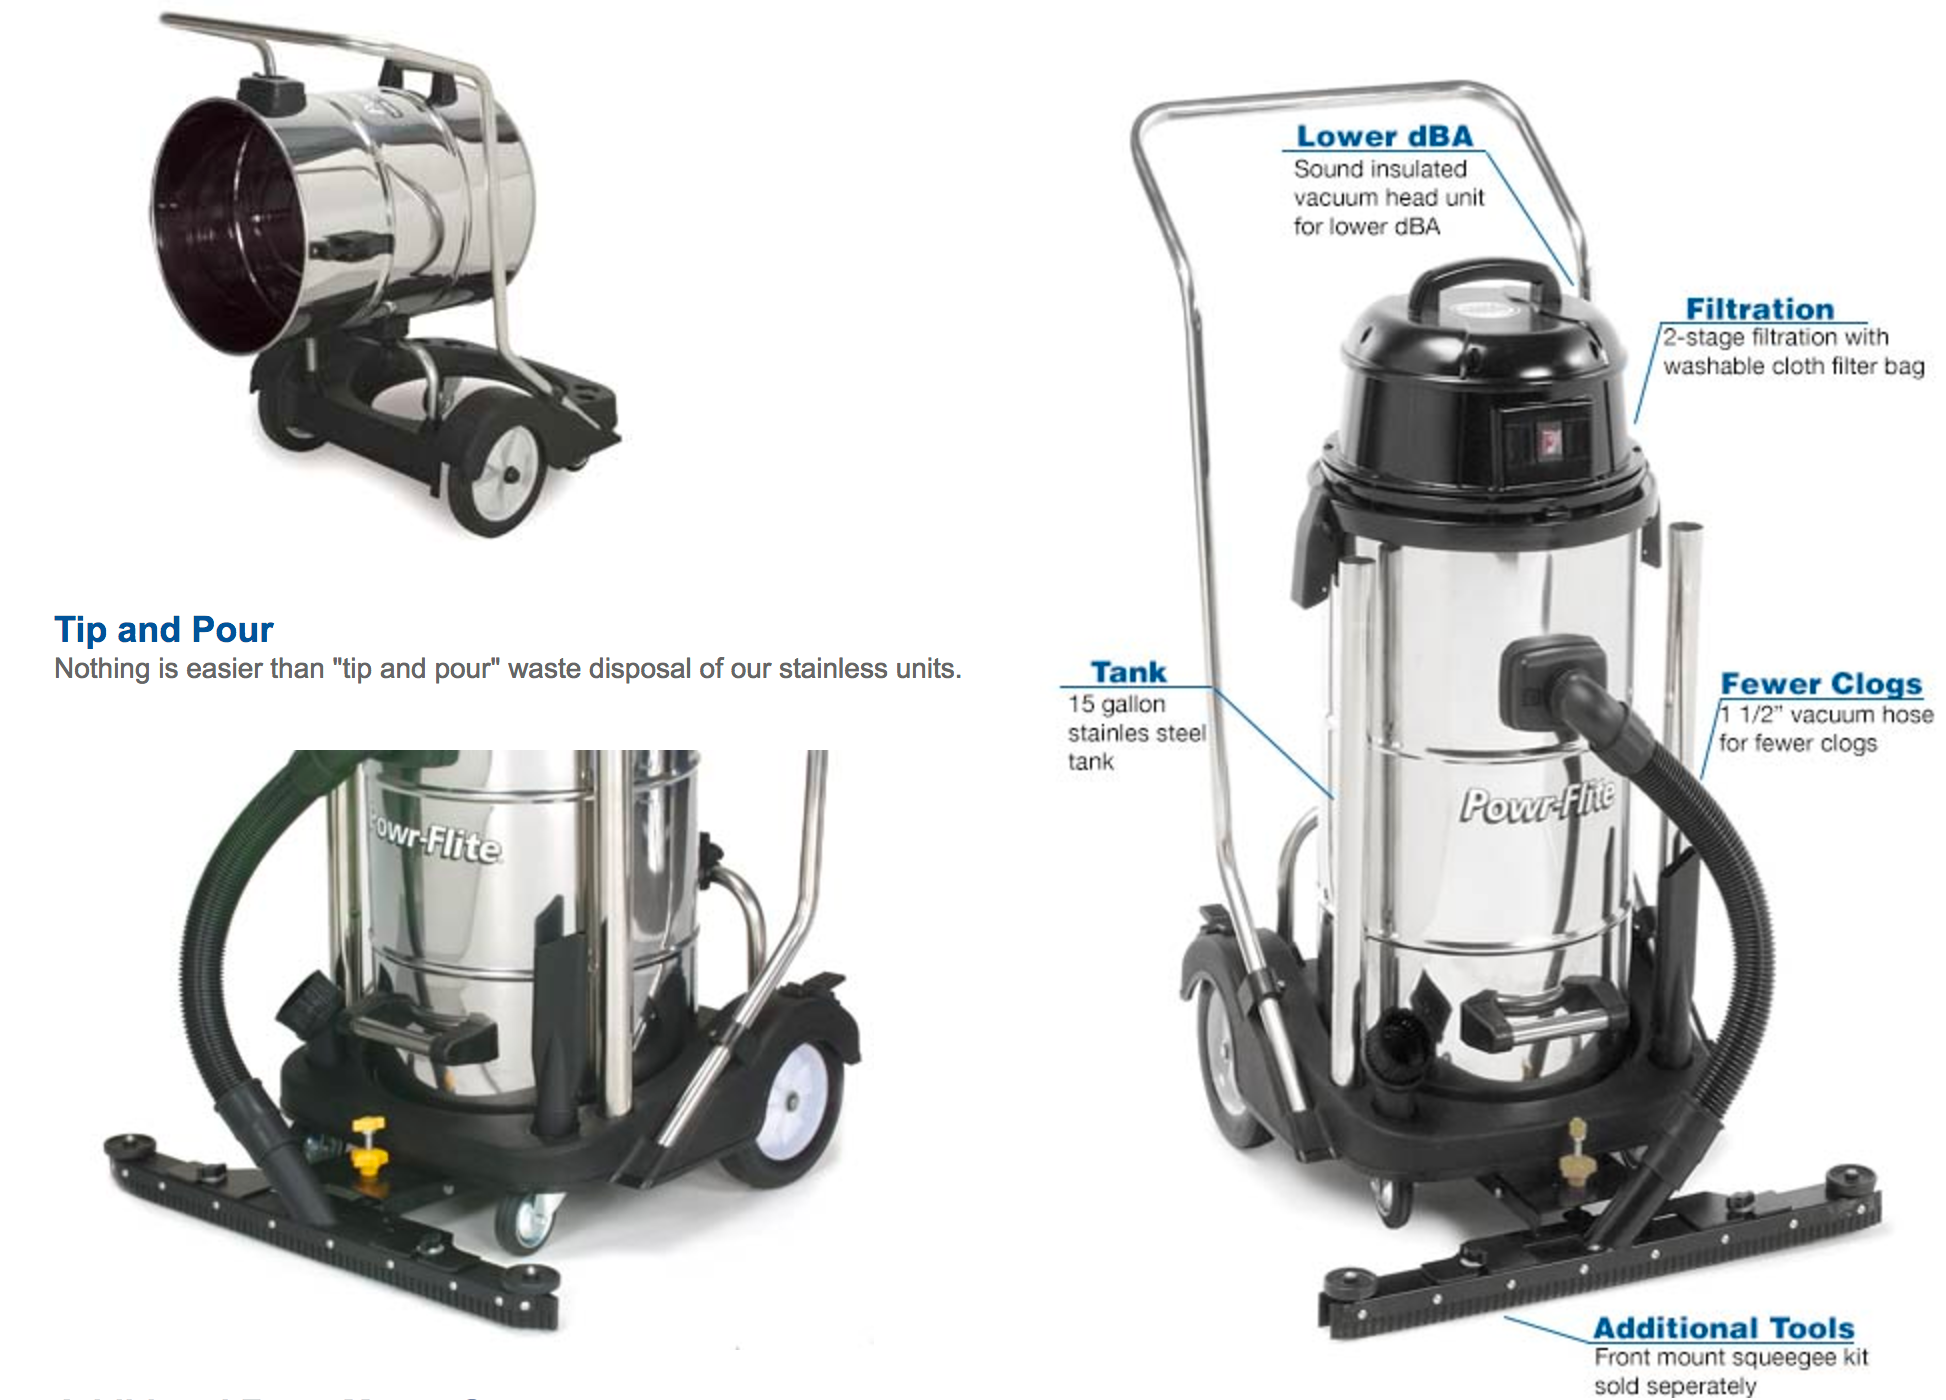 The 15 gallon stainless steel wet dry vacuum provides true professional quality to meet the most demanding needs and environments.